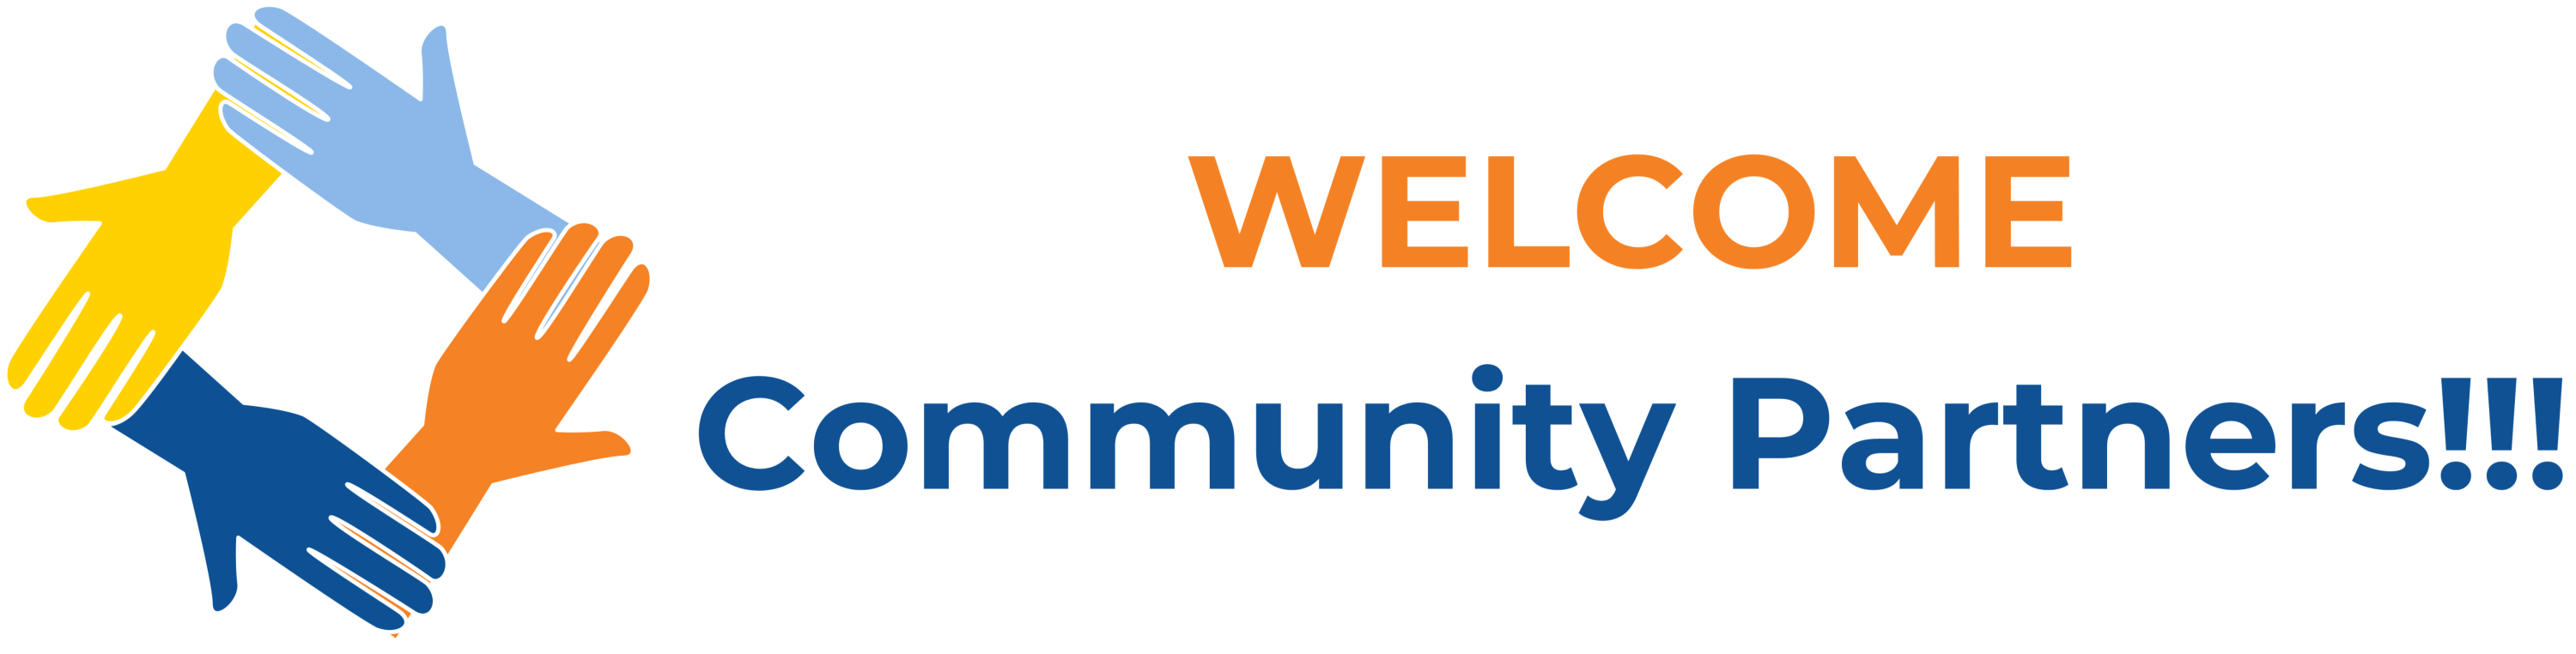 four hands, colored orange, light blue, gold, and dark blue forming a square next to the words "Welcome Community Partners 